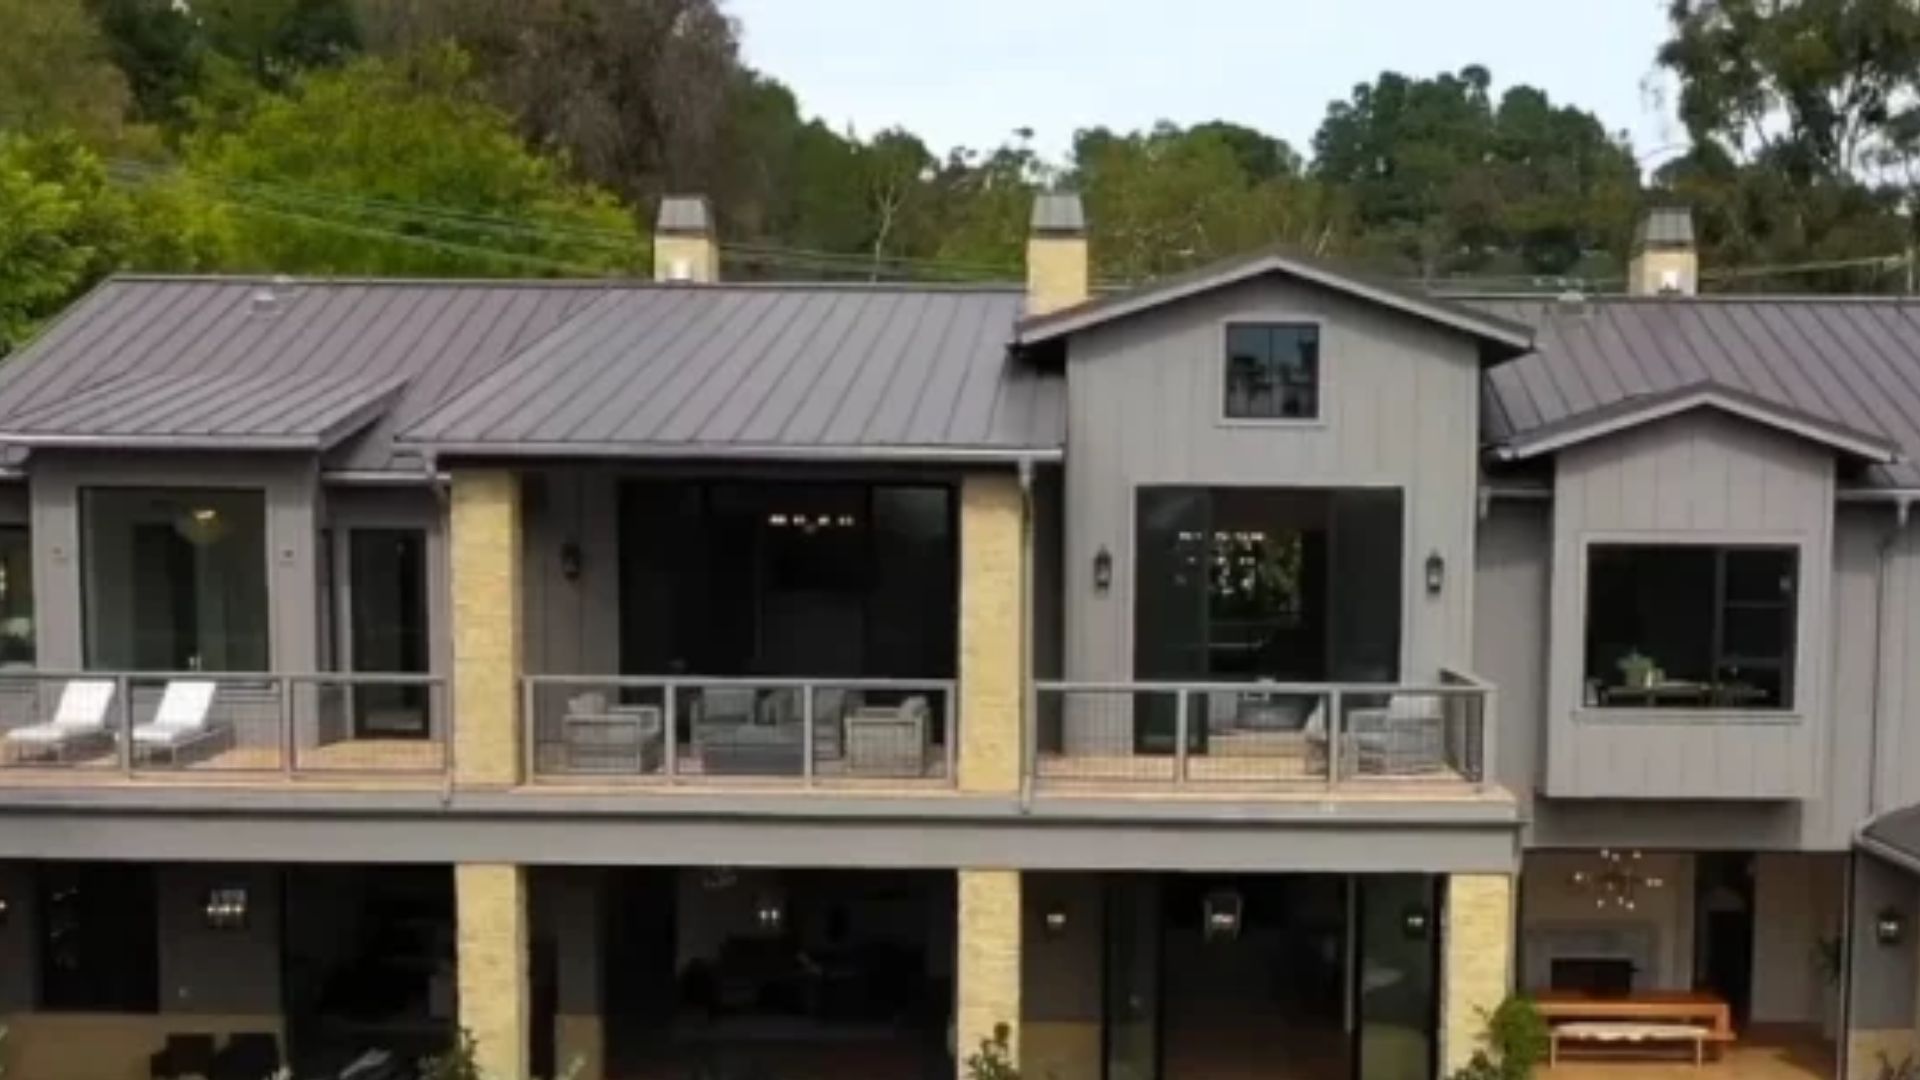 Kendrick Lamar a famous rapper is in the news because he bought a huge house in Brentwood